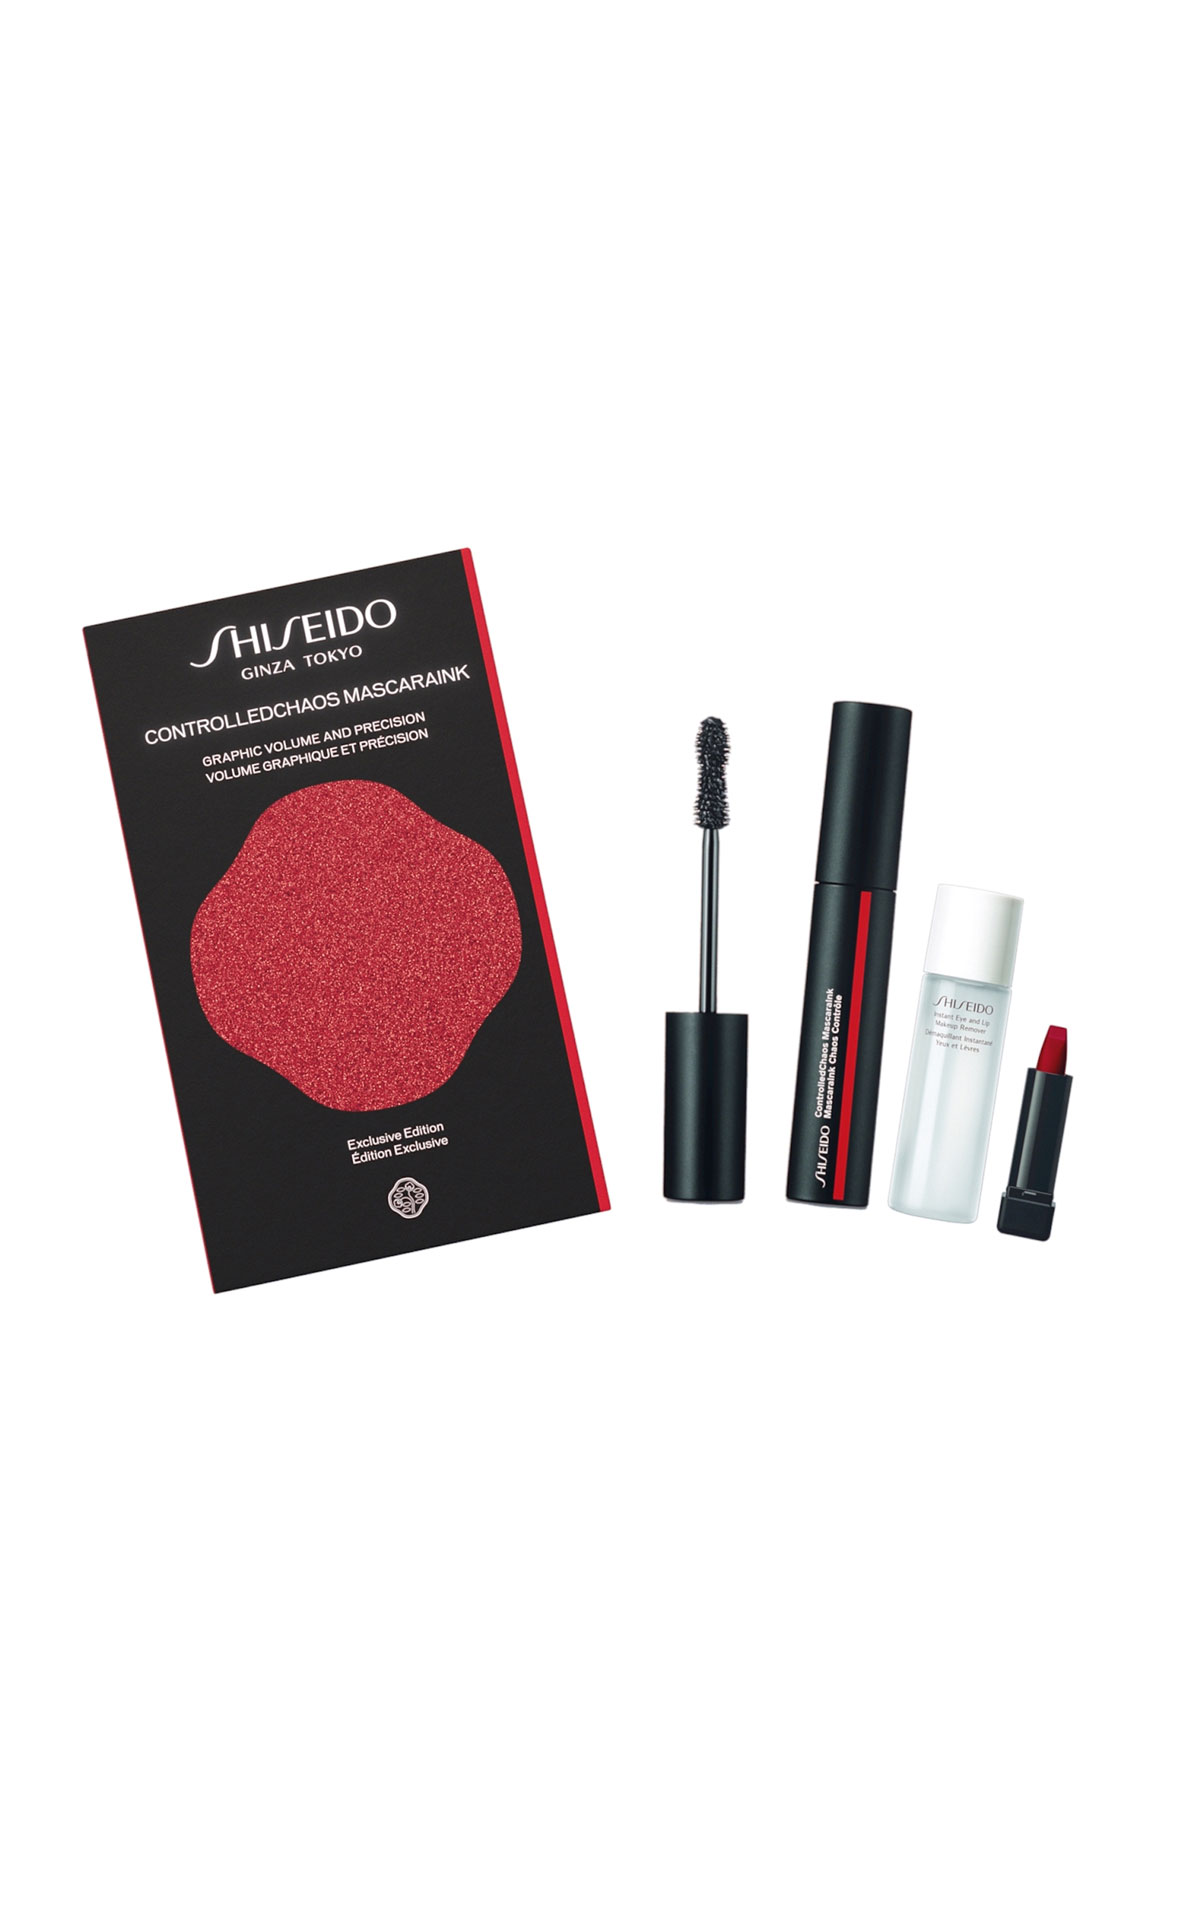 Shiseido Contolled chaos mascaraink exclusive edition from Bicester Village